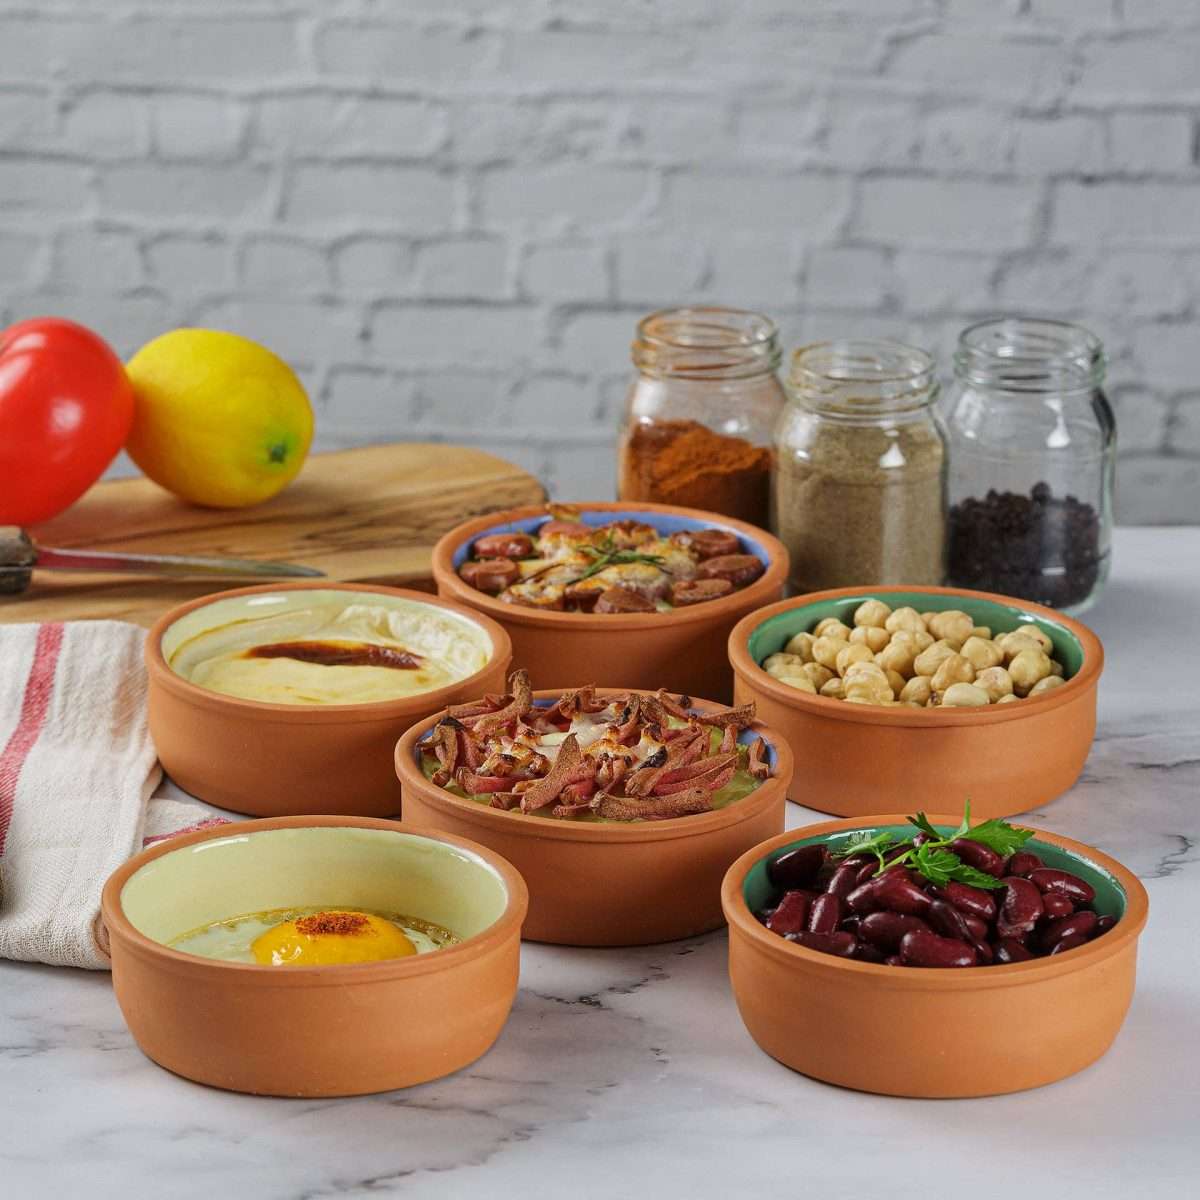 Colored Terracotta Cooking Bowls | Sudha’s Emporium Gourmet, Gifts & Décor | Corning, NY